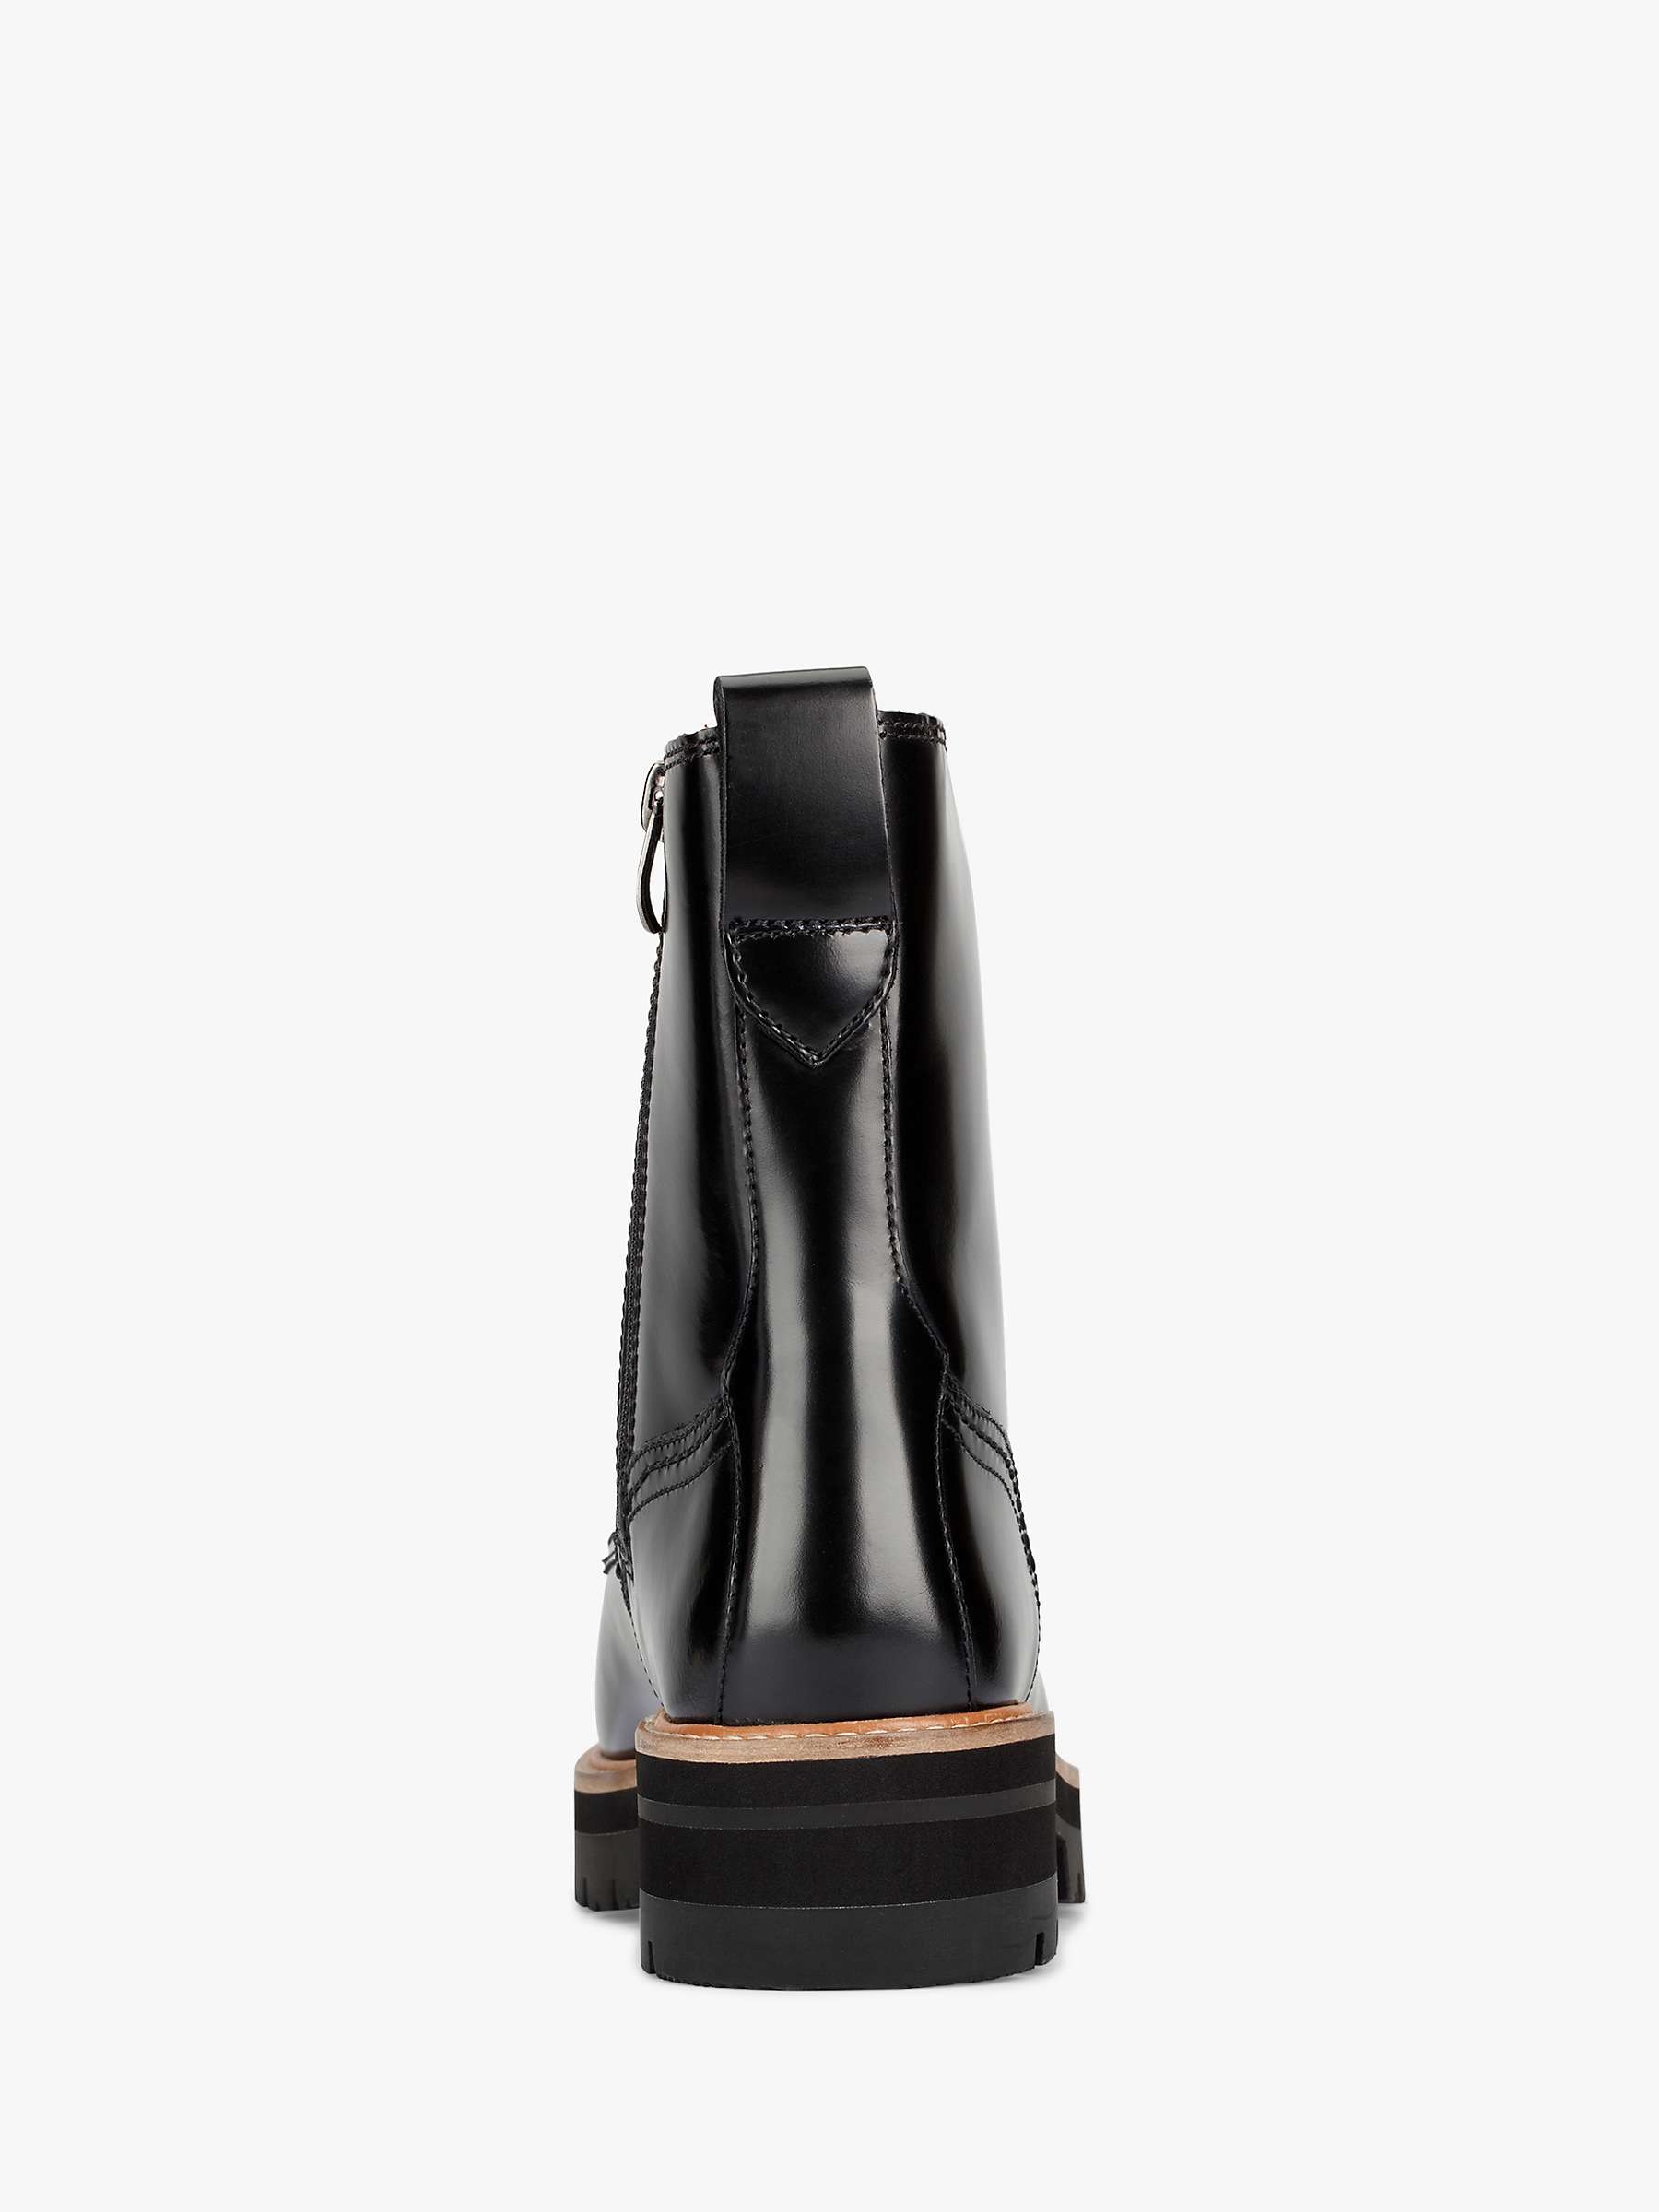 Clarks Orianna Chunky Leather Ankle Boots, Black at John Lewis & Partners